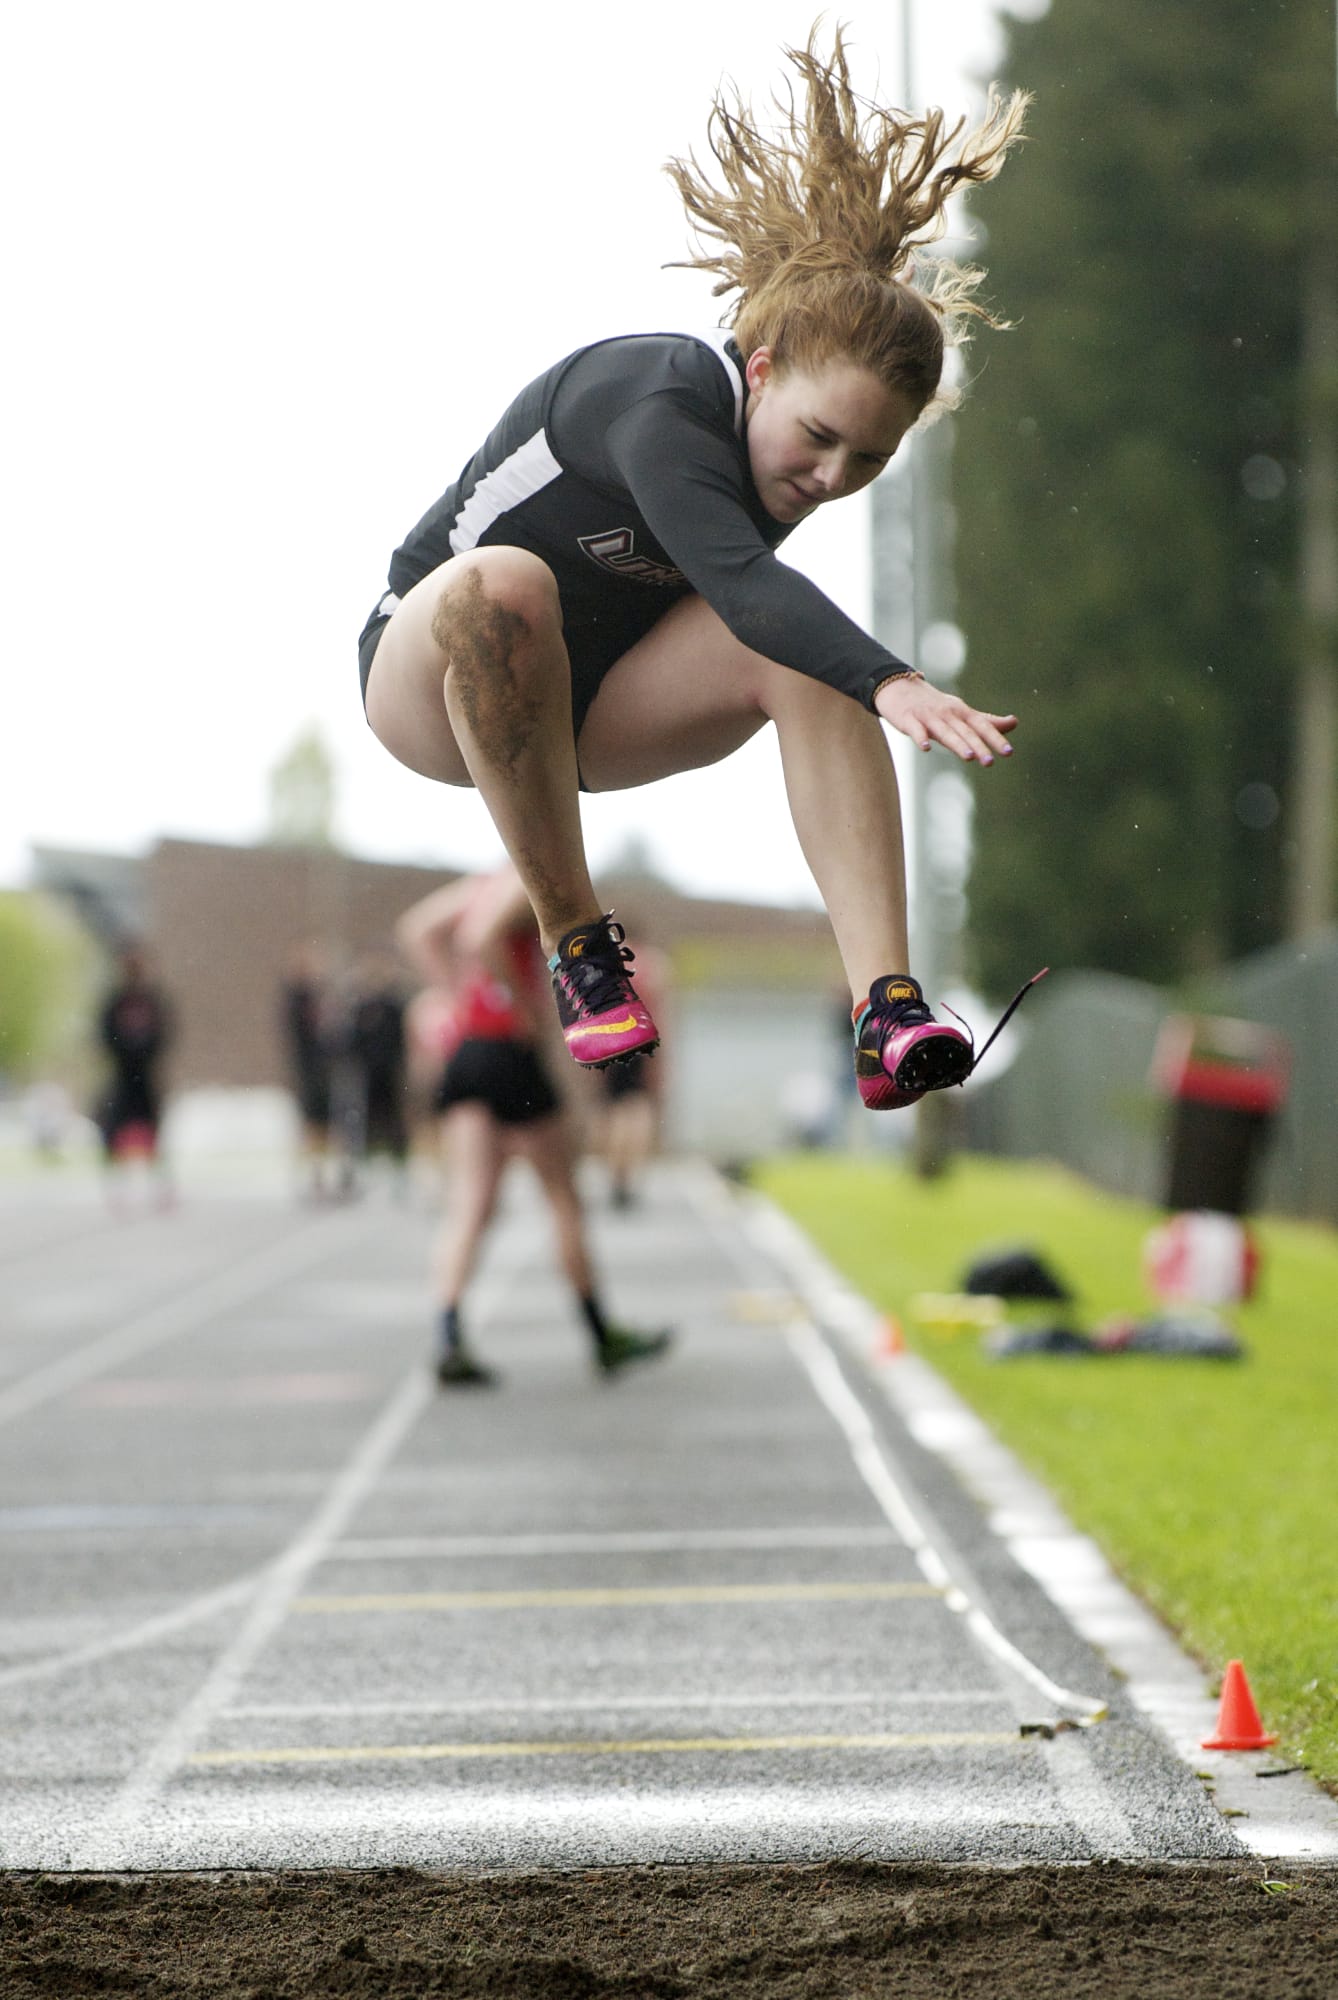 Union's Tayler Troupe competes in the long jump at Camas High School, Tuesday, April 22, 2014.